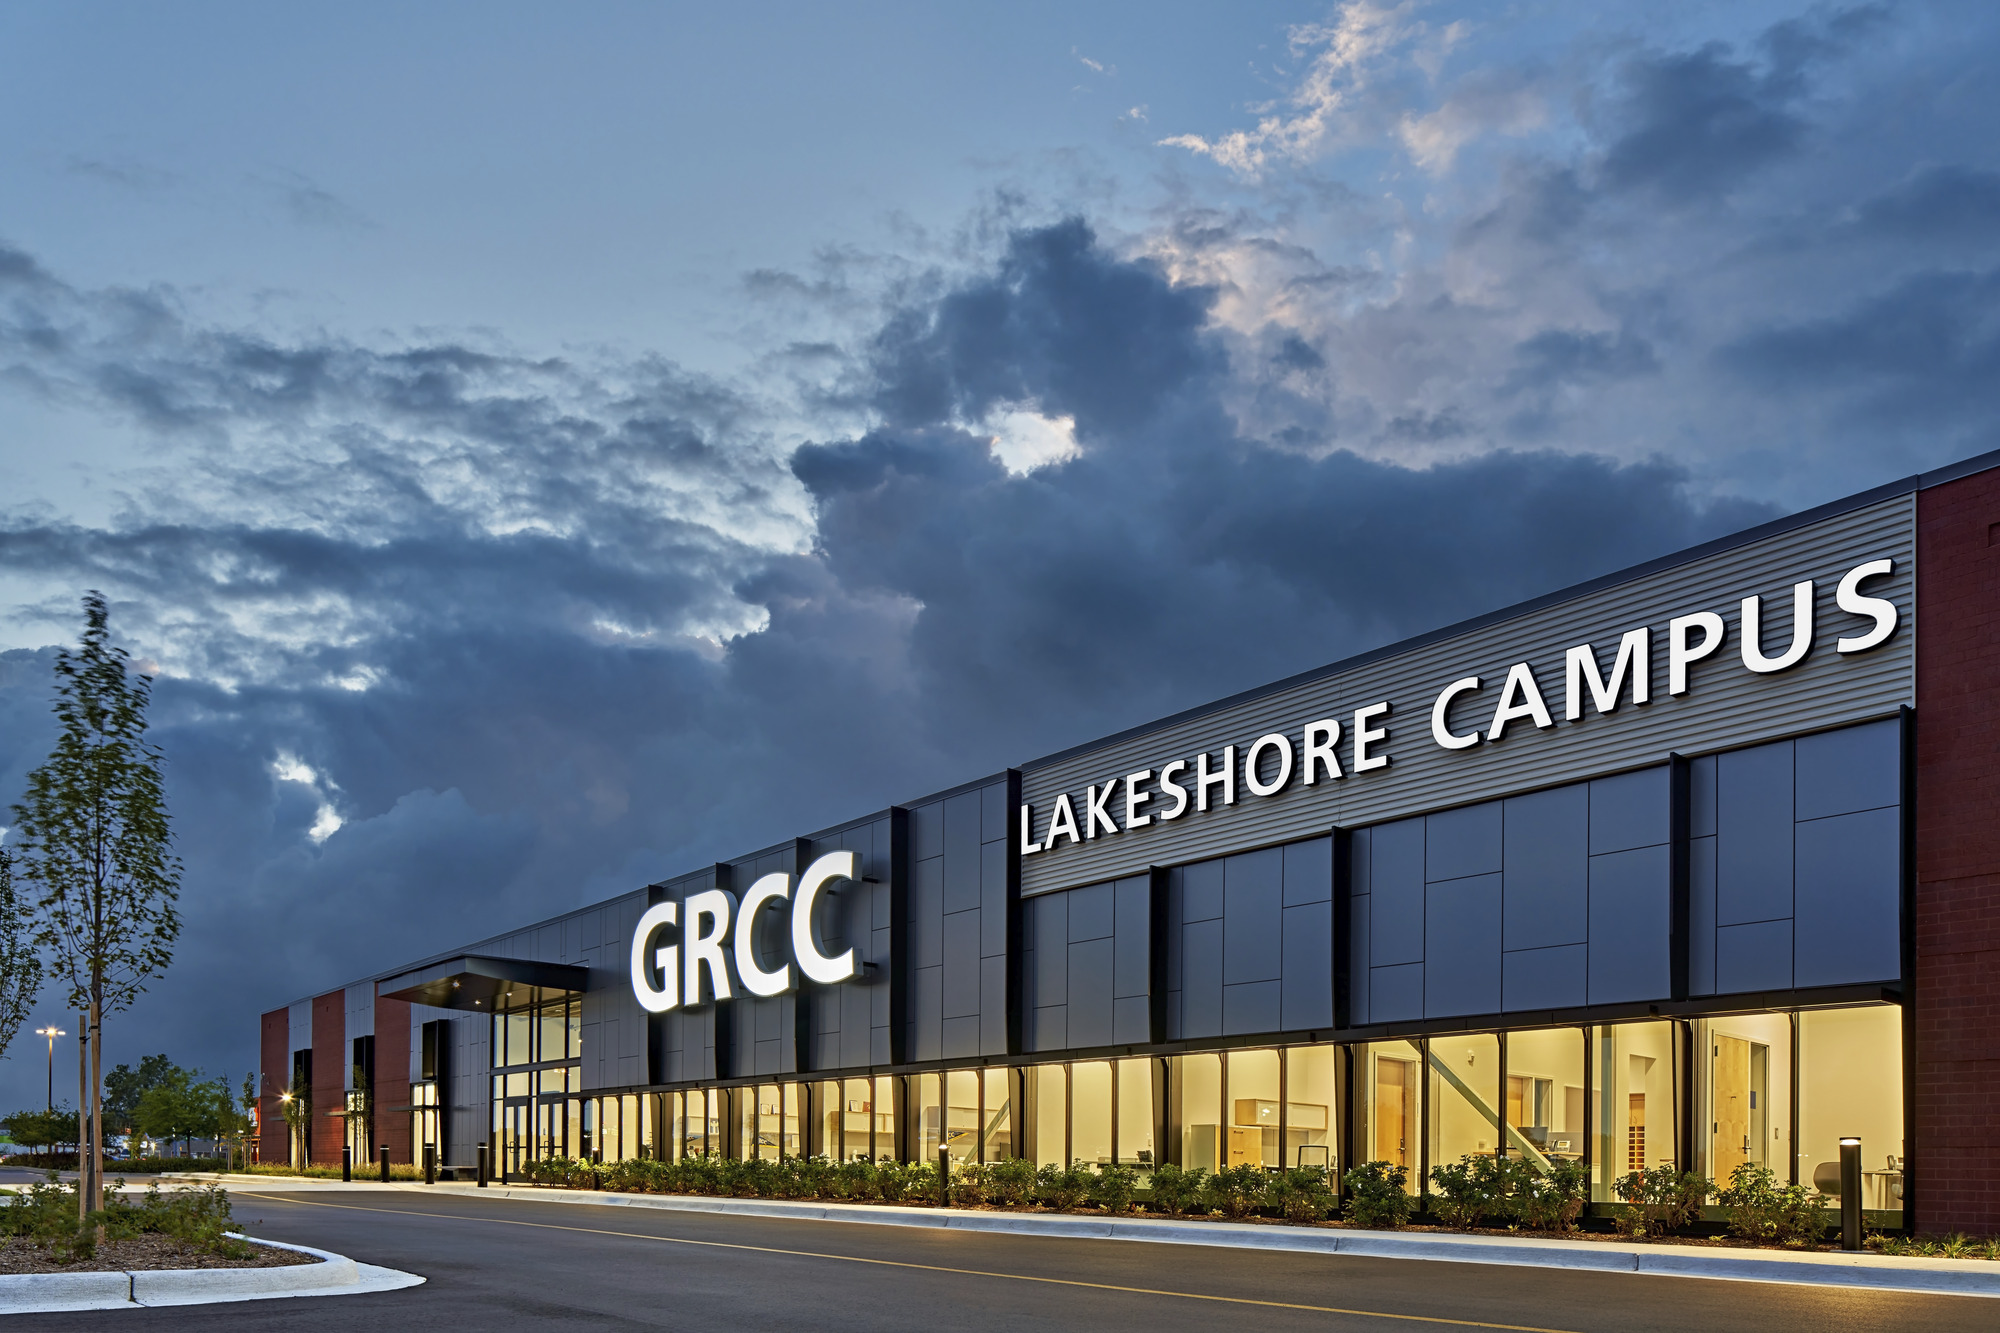 GRCC Lakeshore Campus, Ender Hall transformations earn national